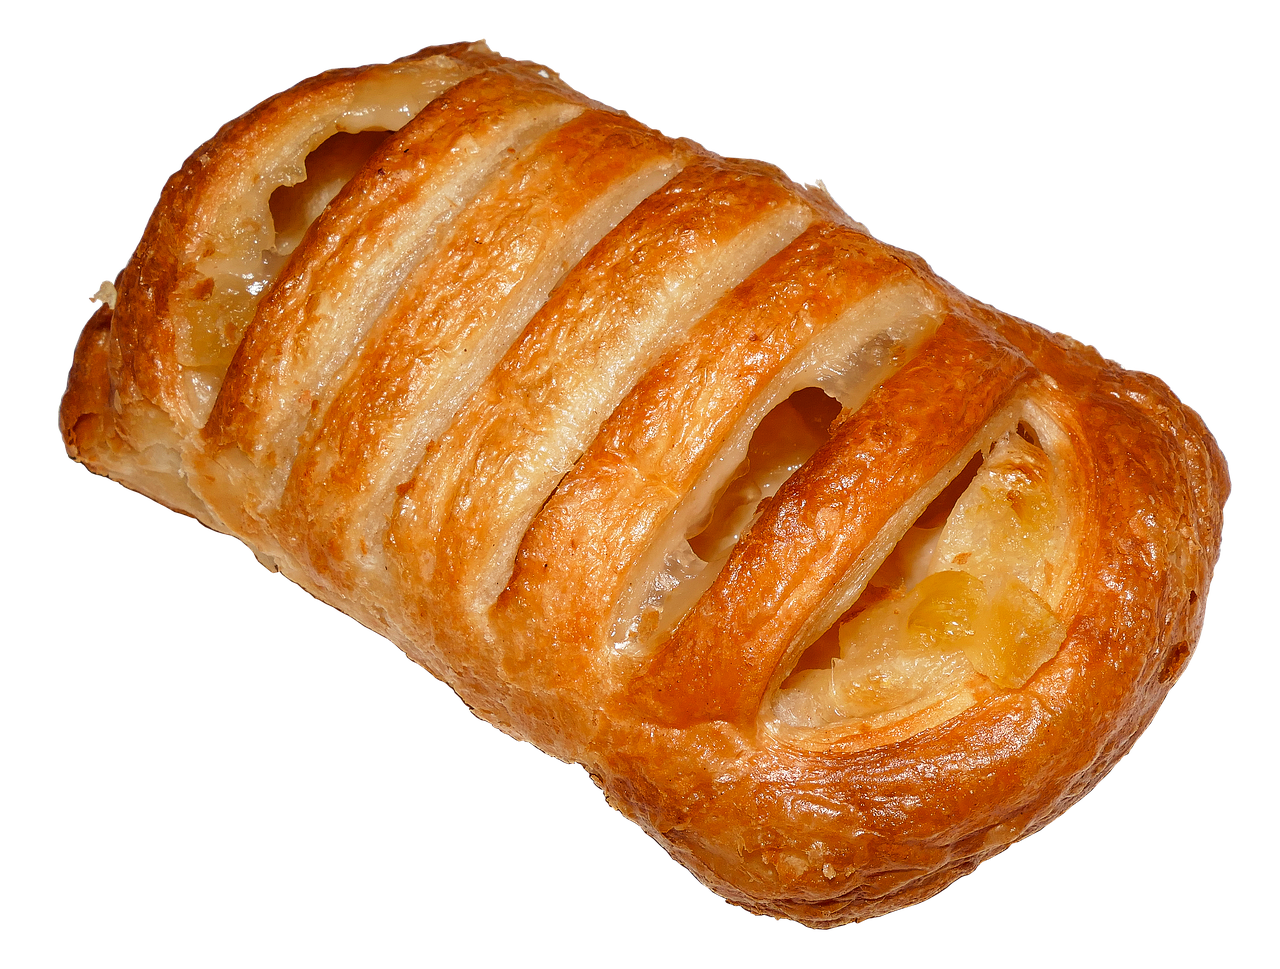 A turnover pastry